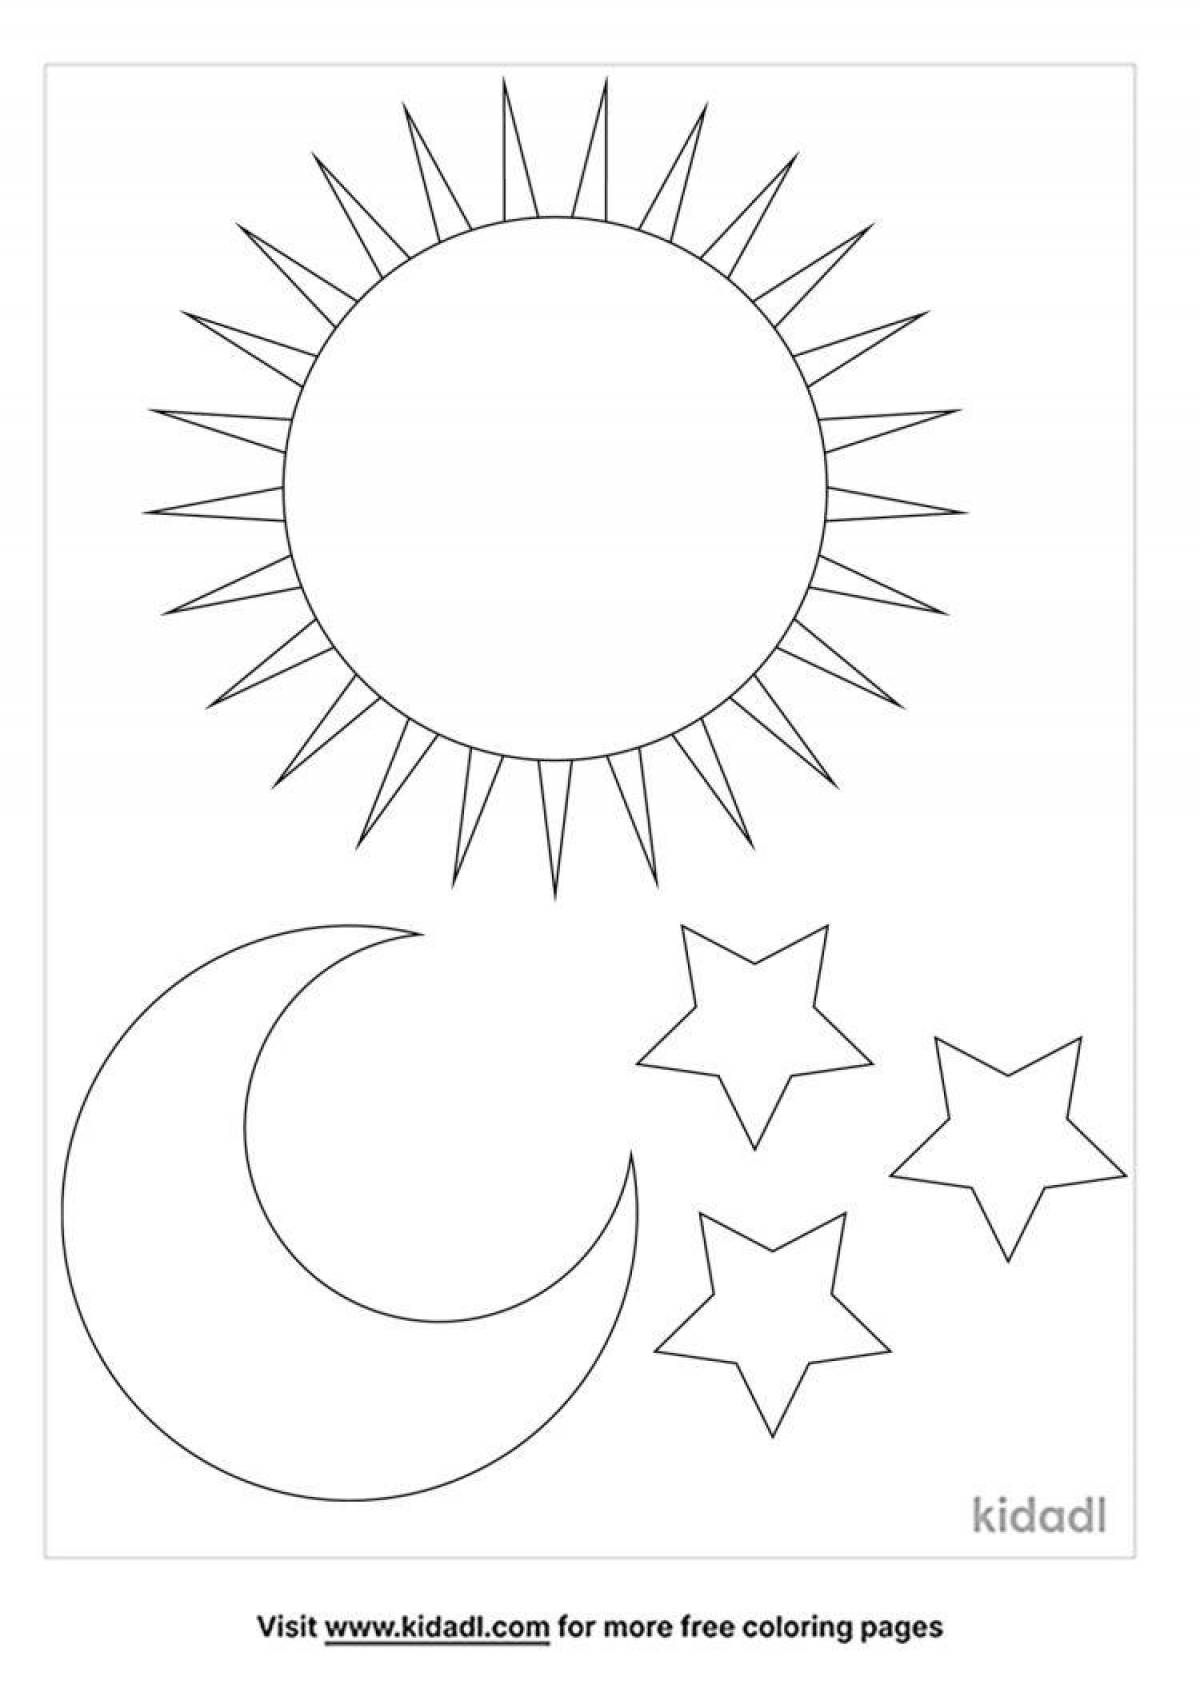 Moon and sun for kids #6